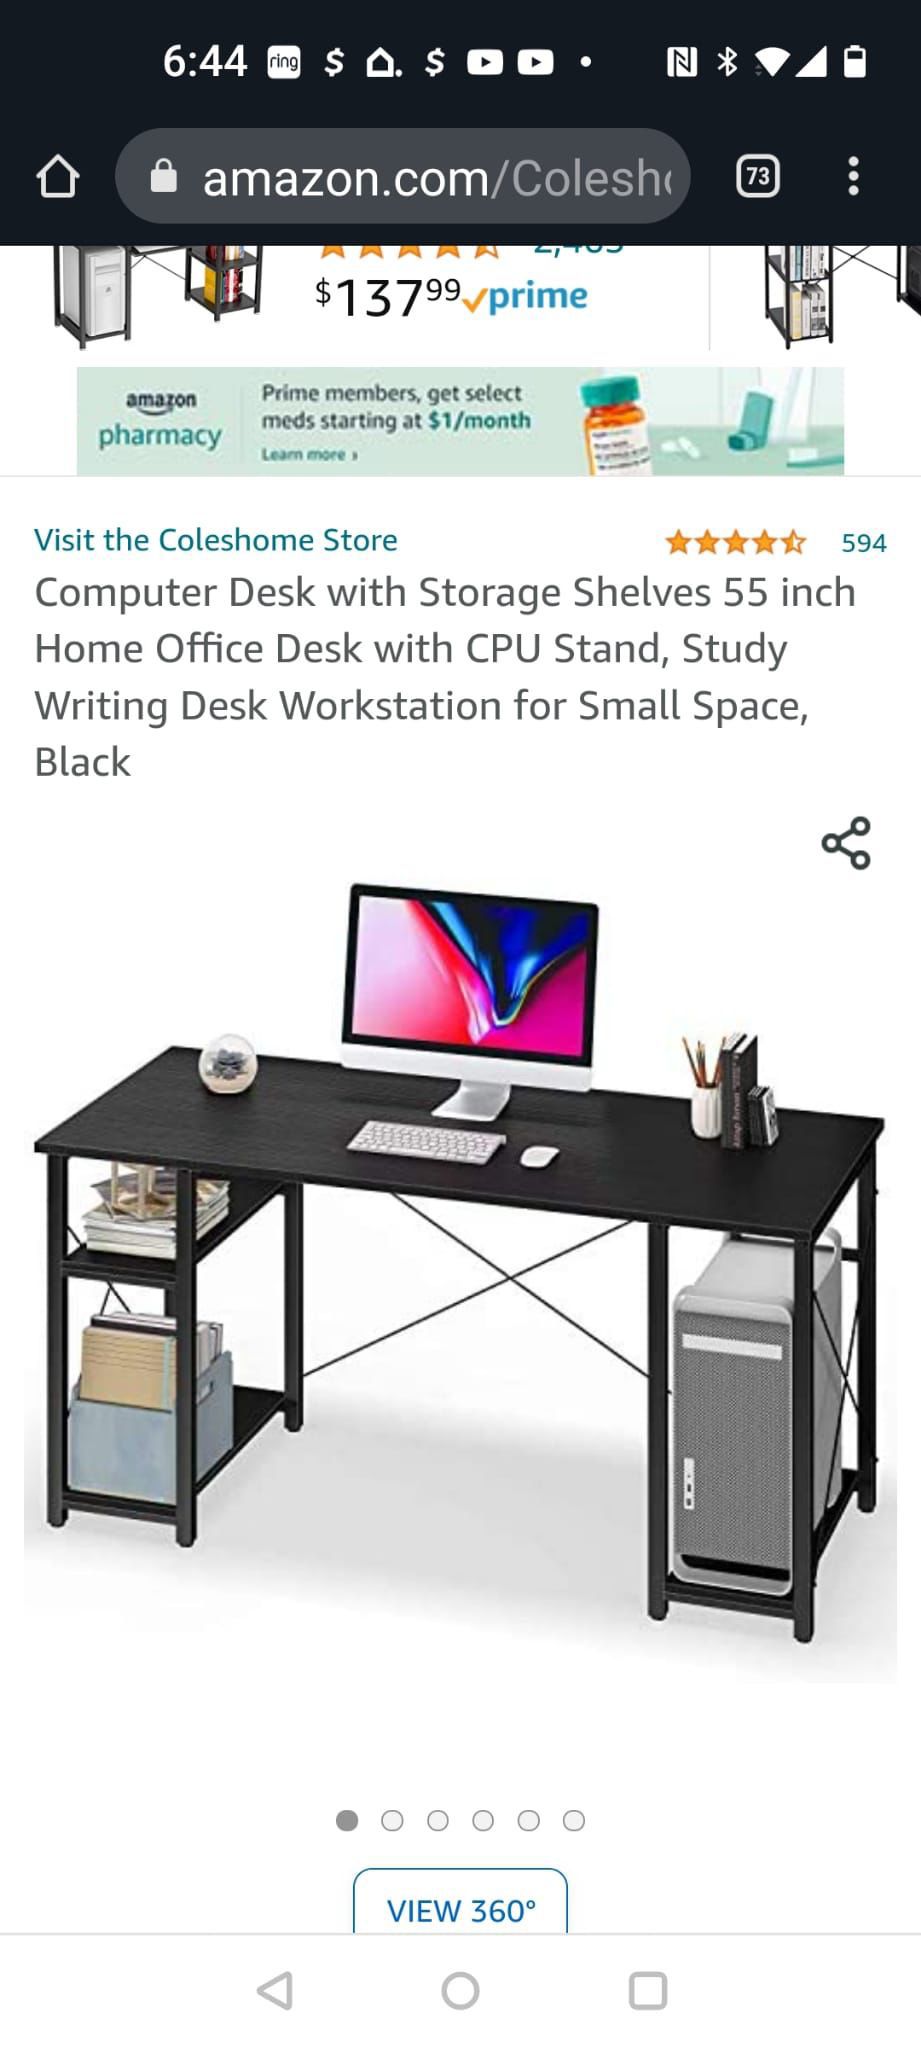 Computer Desk With Storage Shelves 55 Inch Home Office Desk With CPU Stand Study Written Desk Workstation 